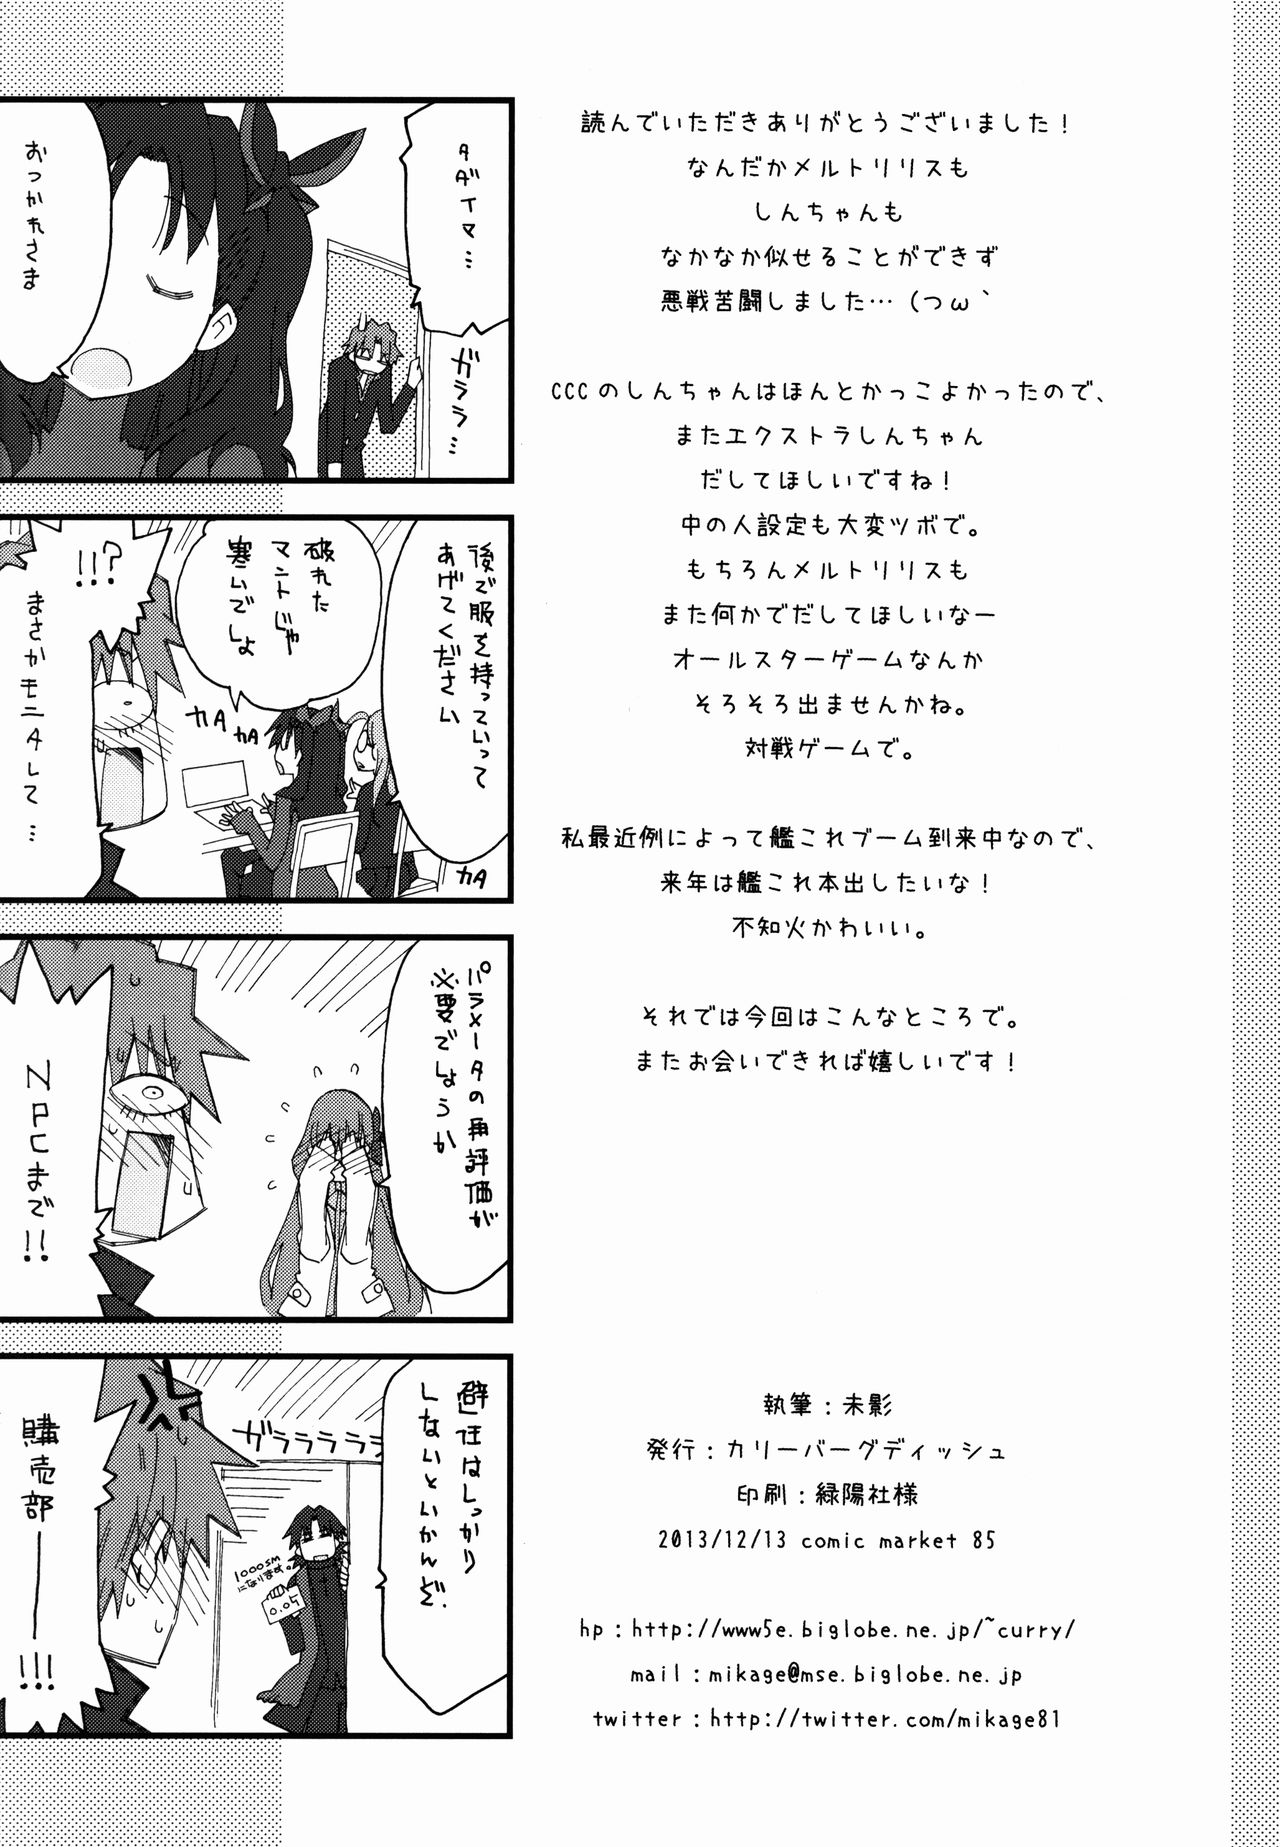 (C85) [CurryBergDish (Mikage)] Melty/kiss (Fate/EXTRA) page 25 full